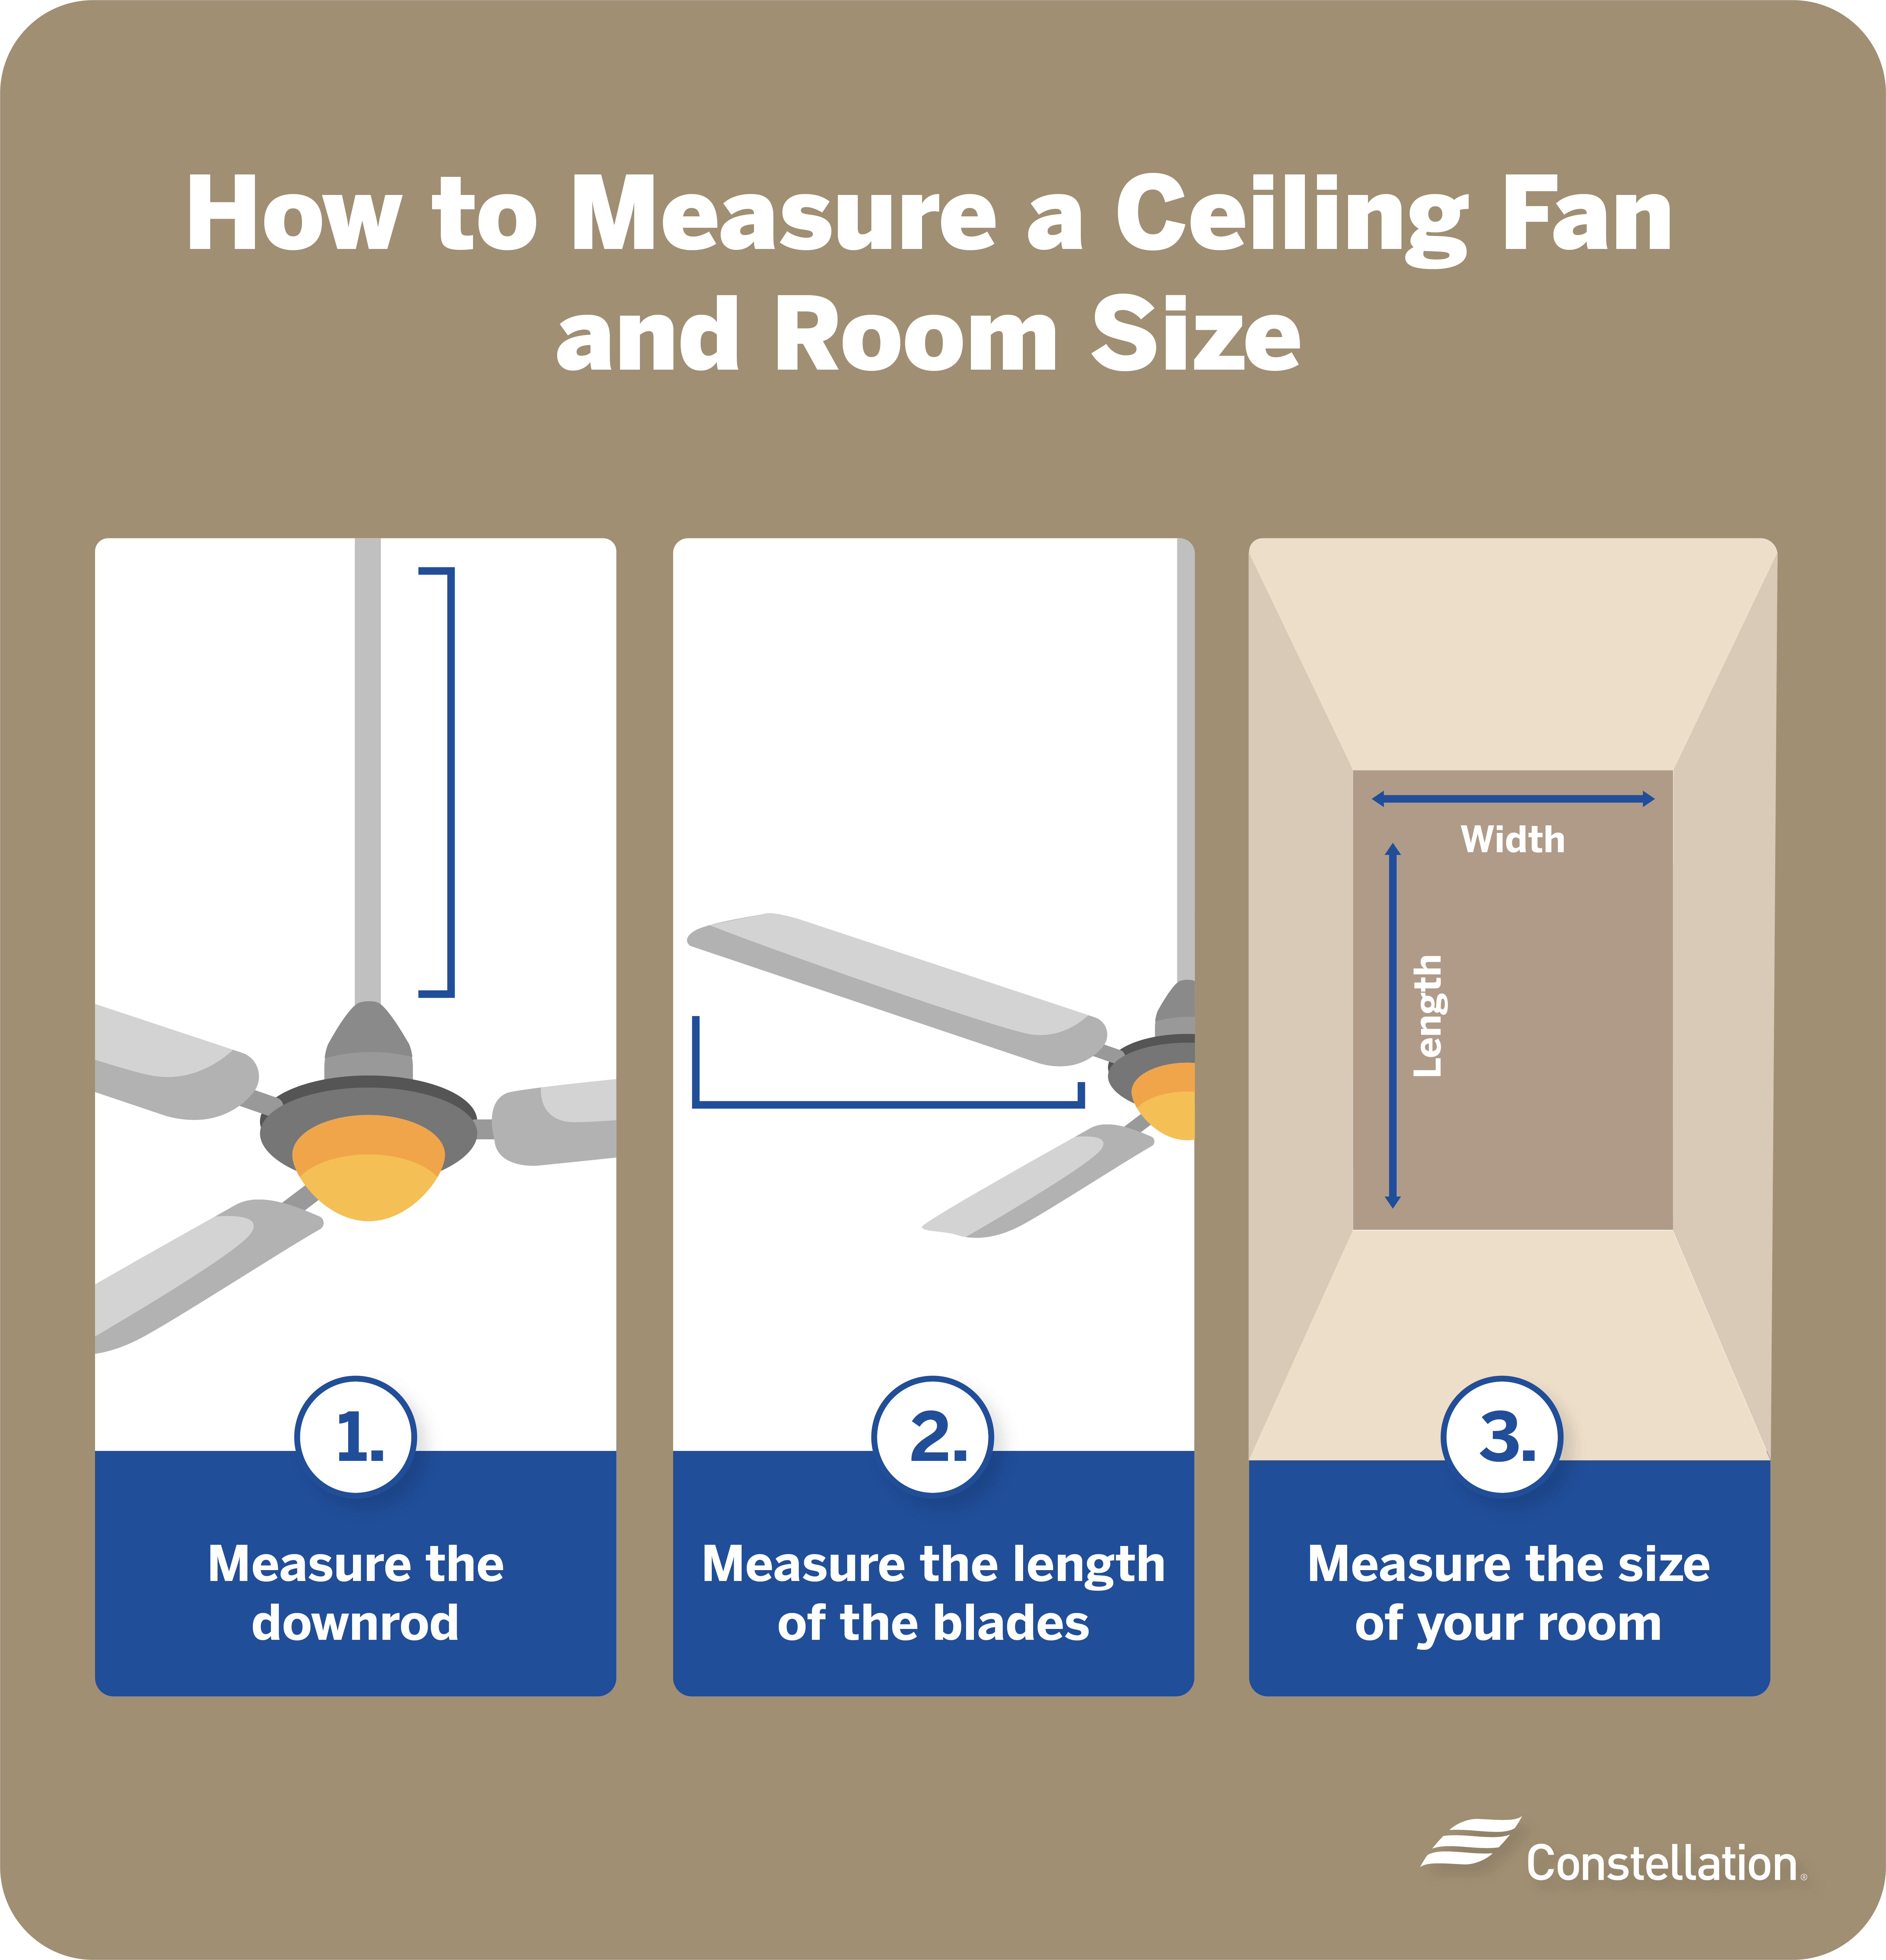 How to measure a ceiling fan and room size